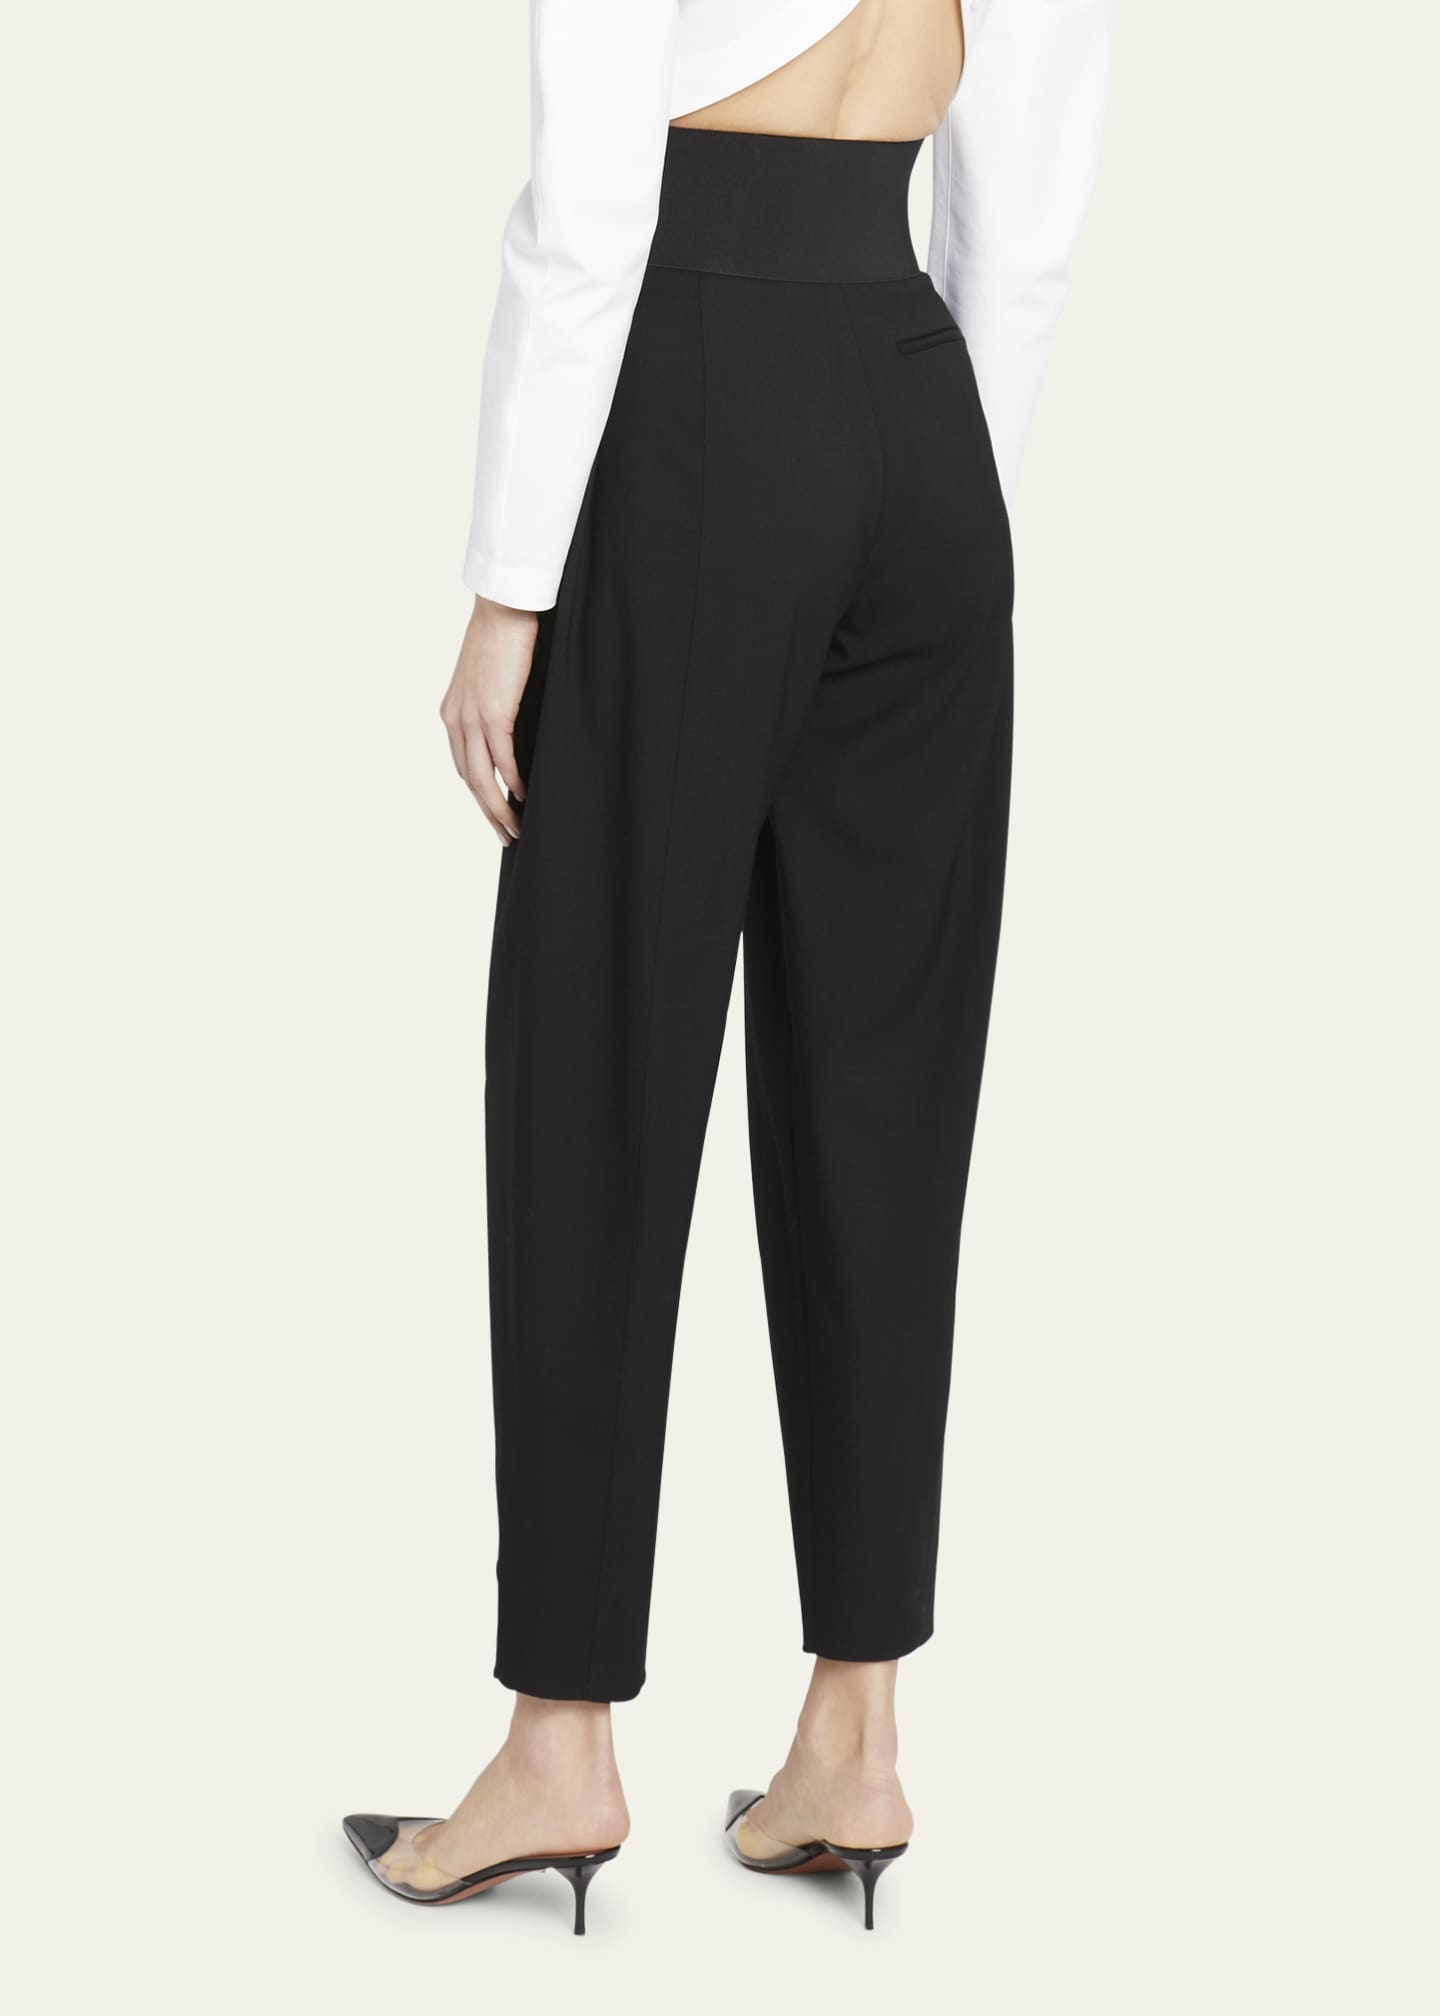 ALAIA Belted Cropped Trousers - Bergdorf Goodman